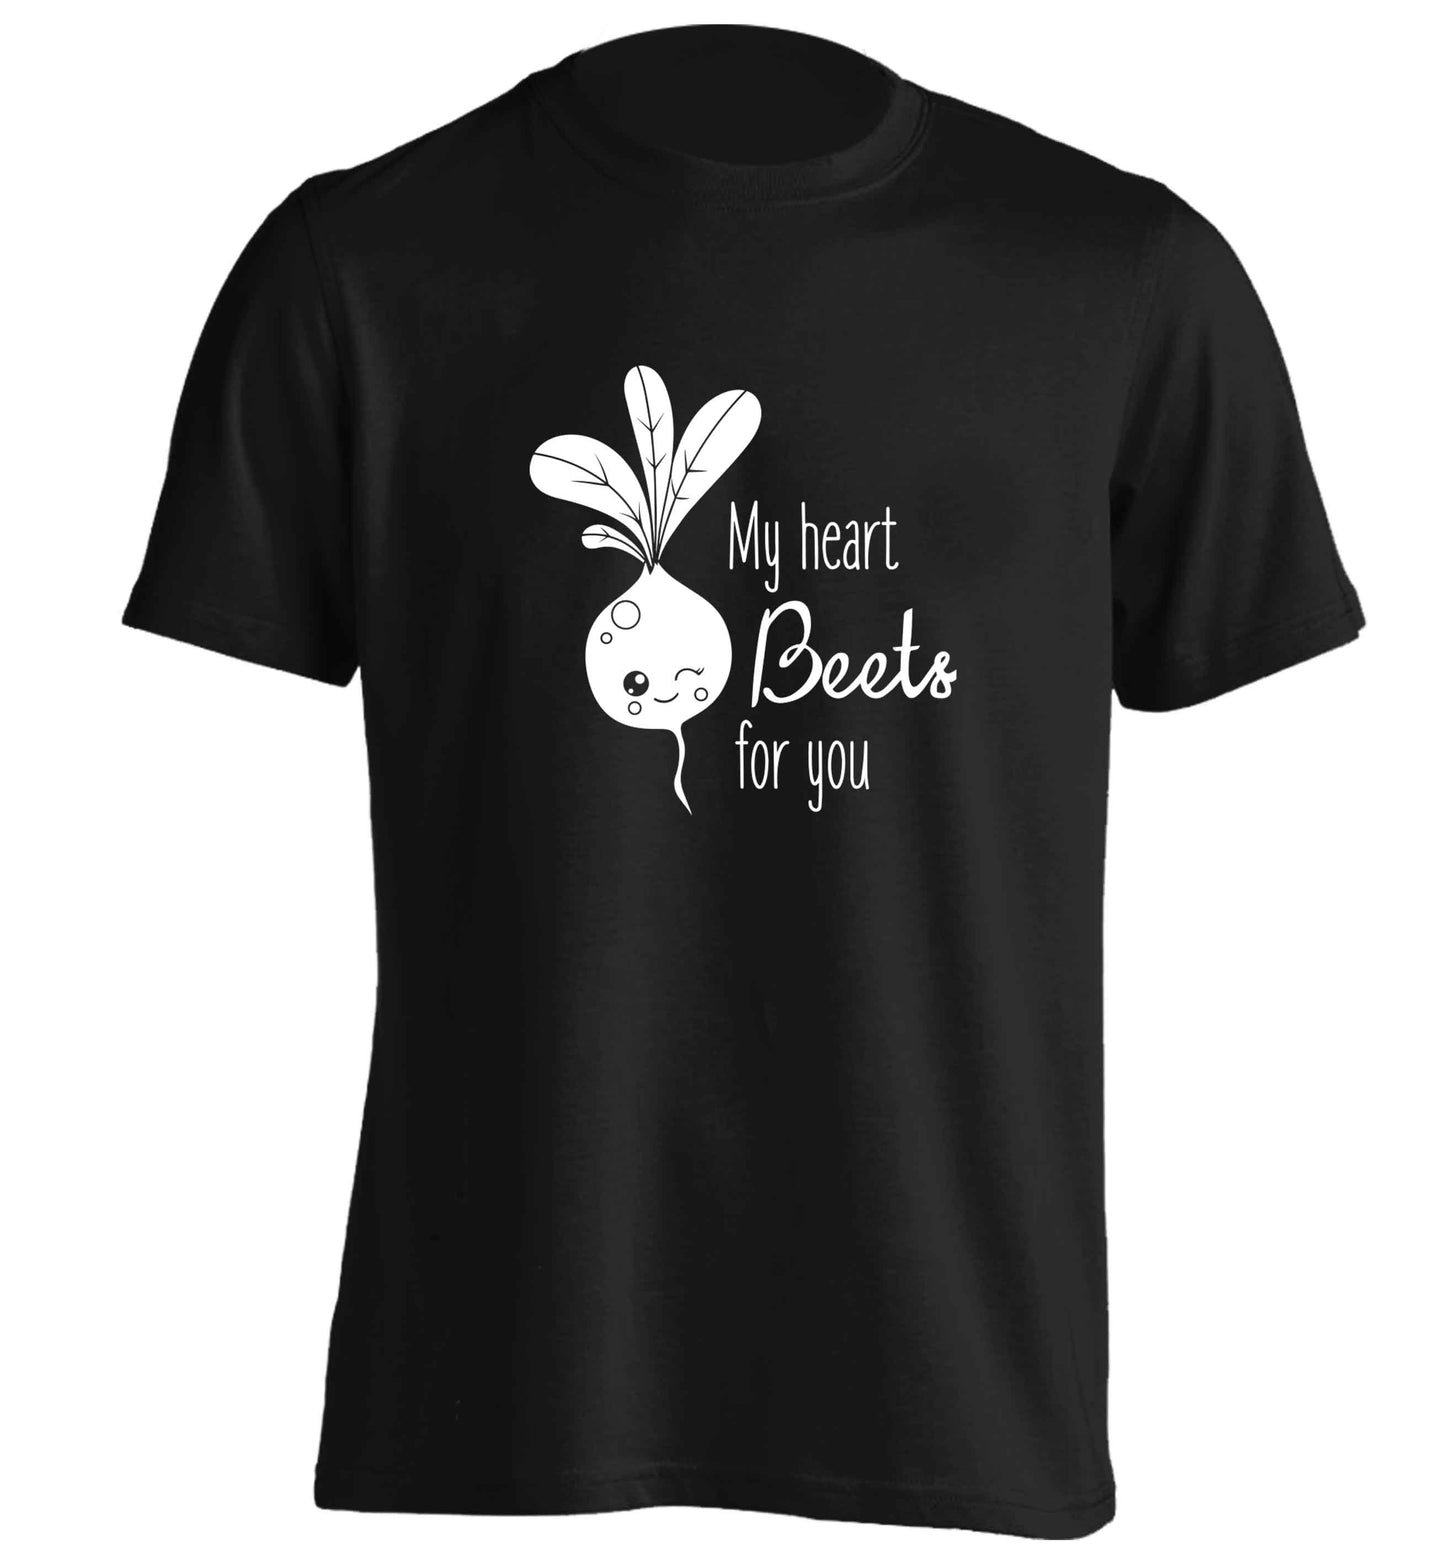 My heart beets for you adults unisex black Tshirt 2XL